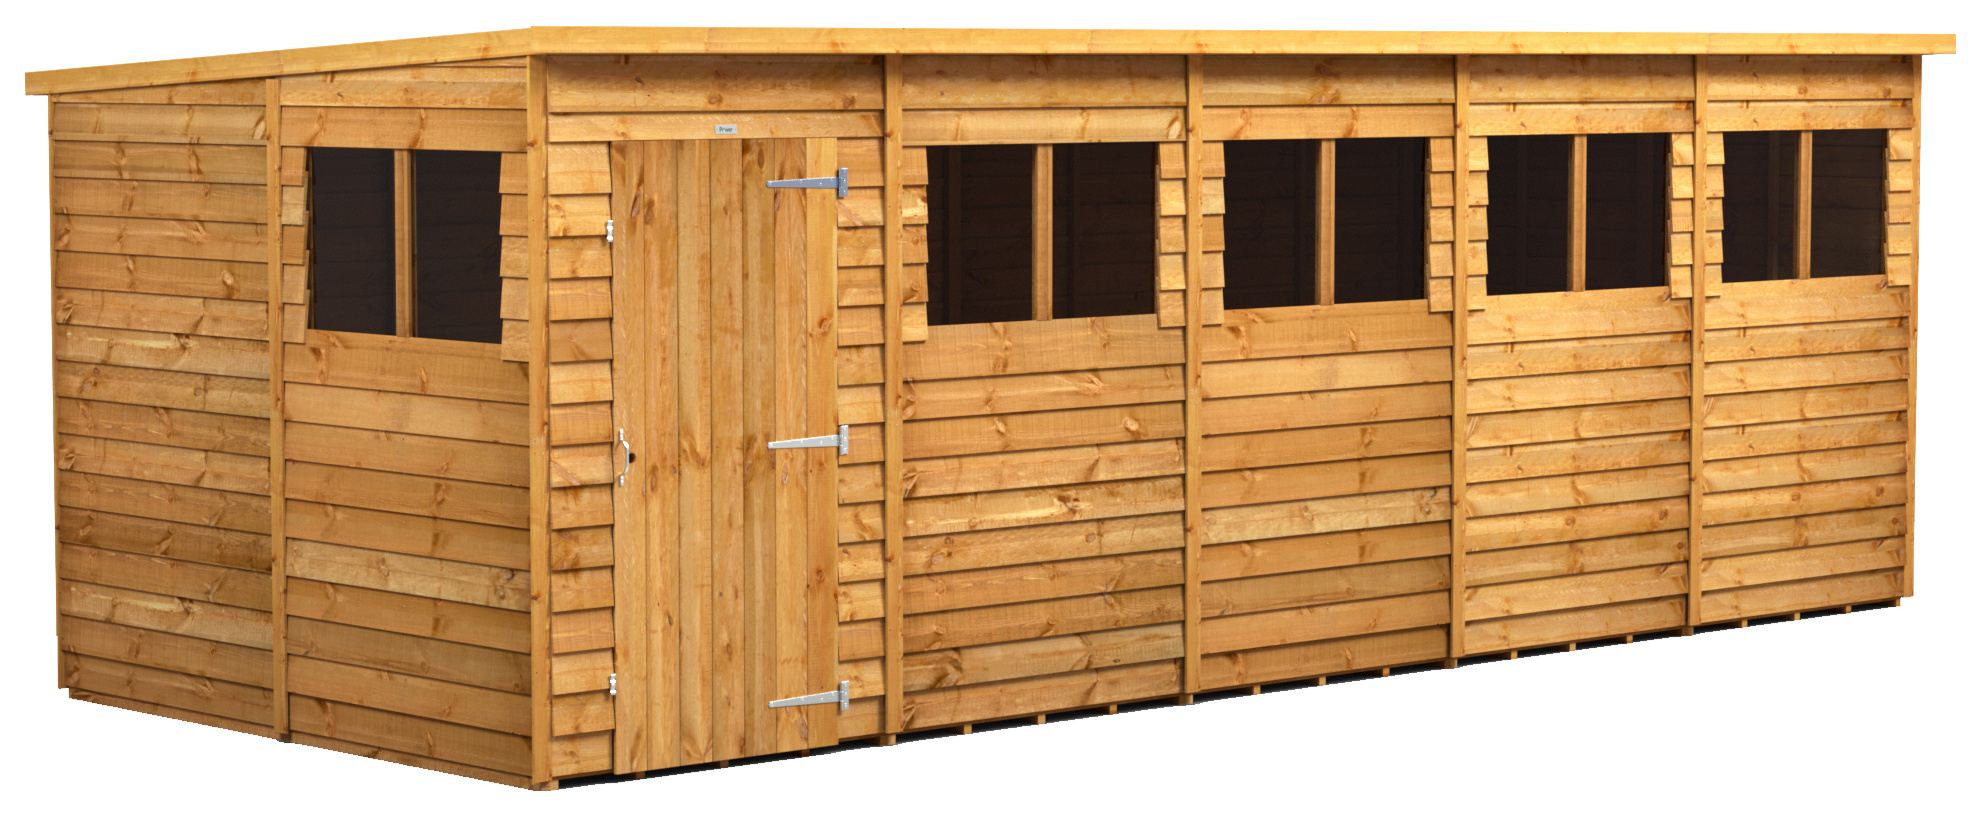 Power Sheds 20 x 8ft Pent Overlap Dip Treated Shed